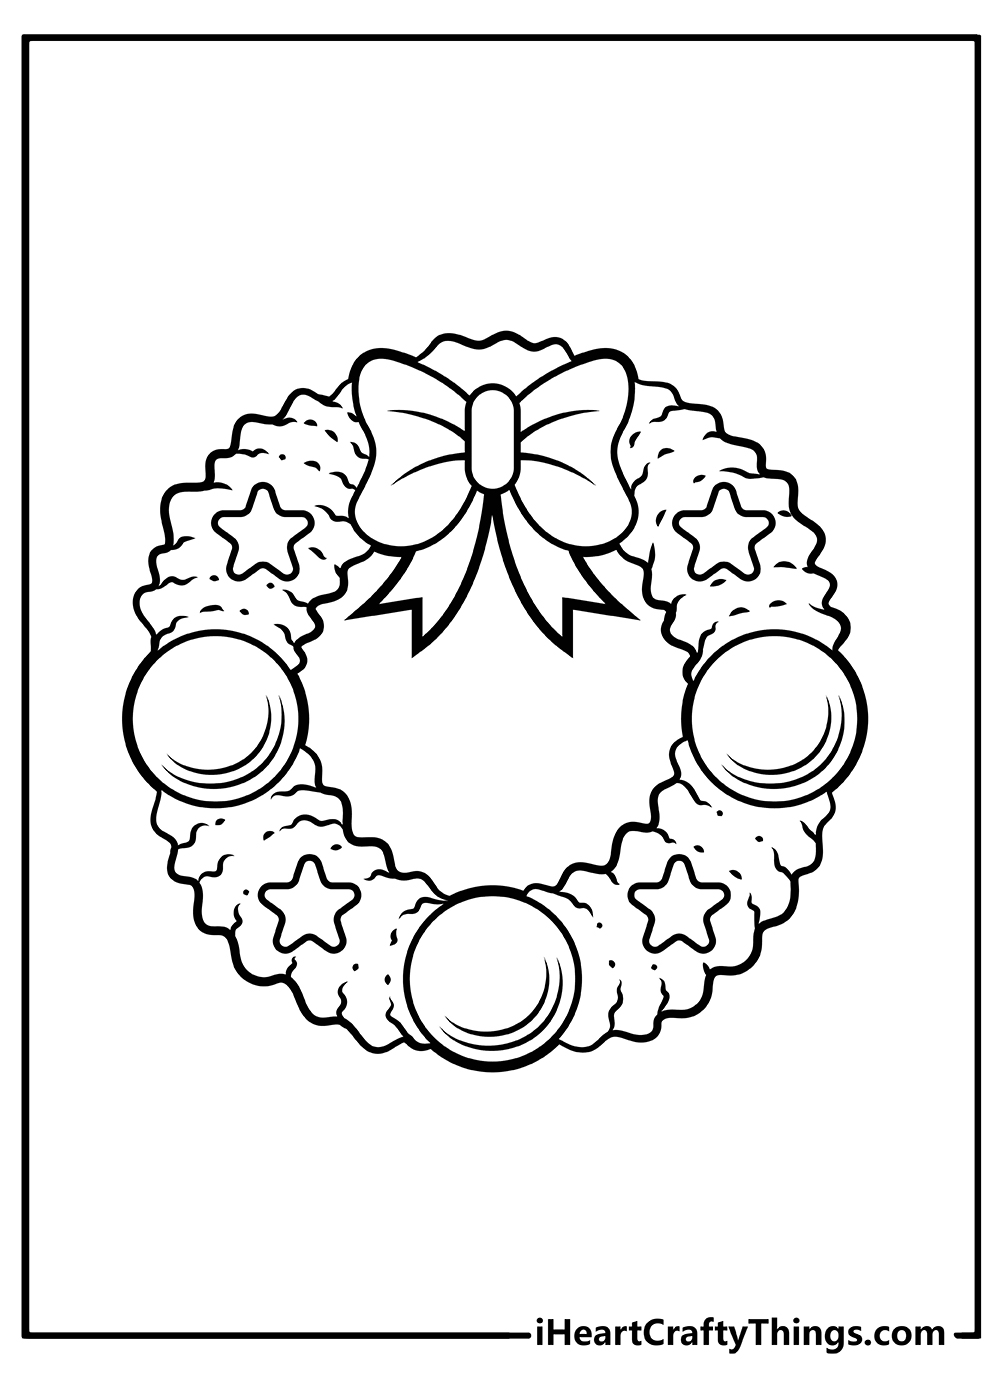 original Christmas Coloring Pages free download